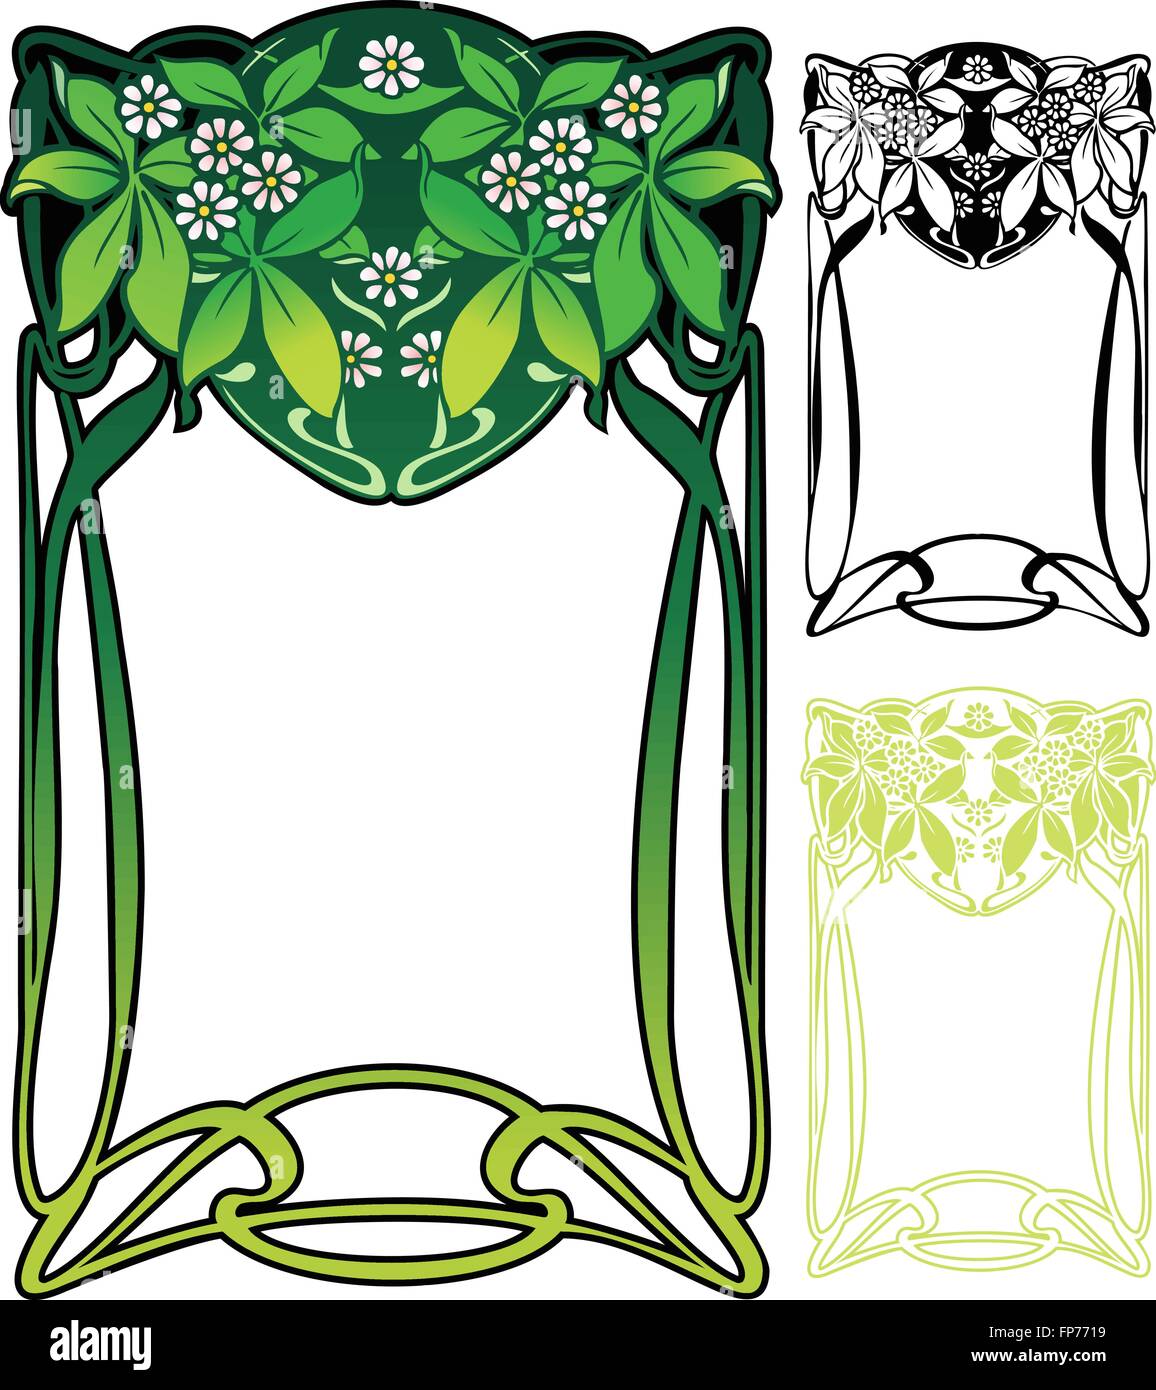 art nouveau style border with leaves and flowers Stock Image